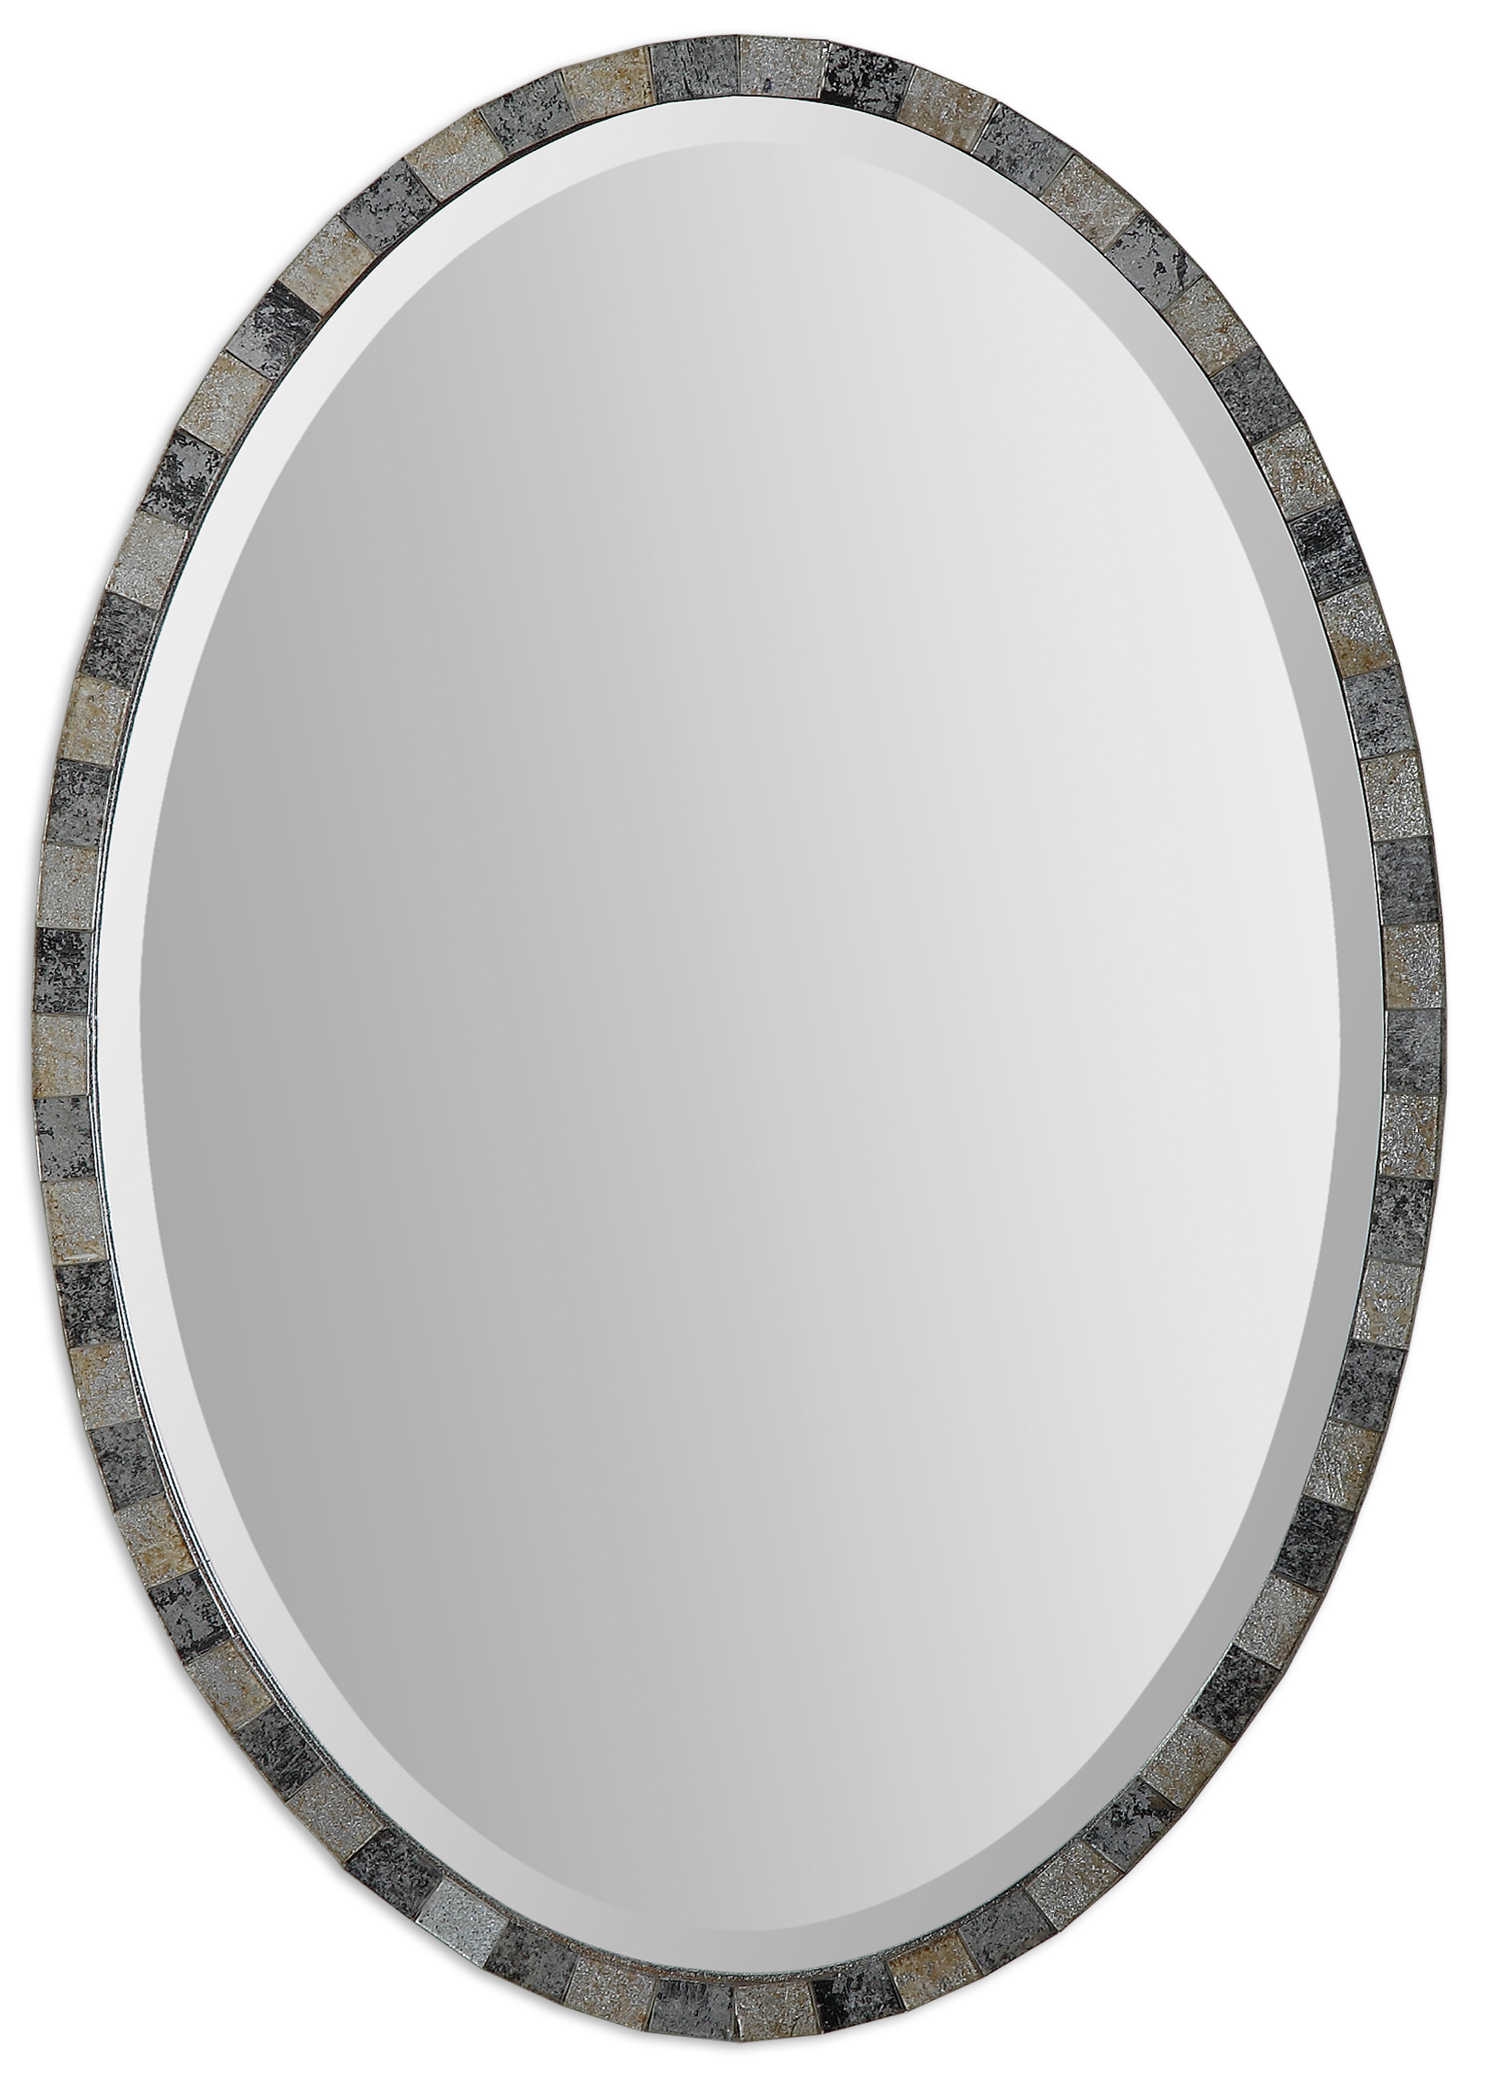 PAREDES OVAL MIRROR - Image 0